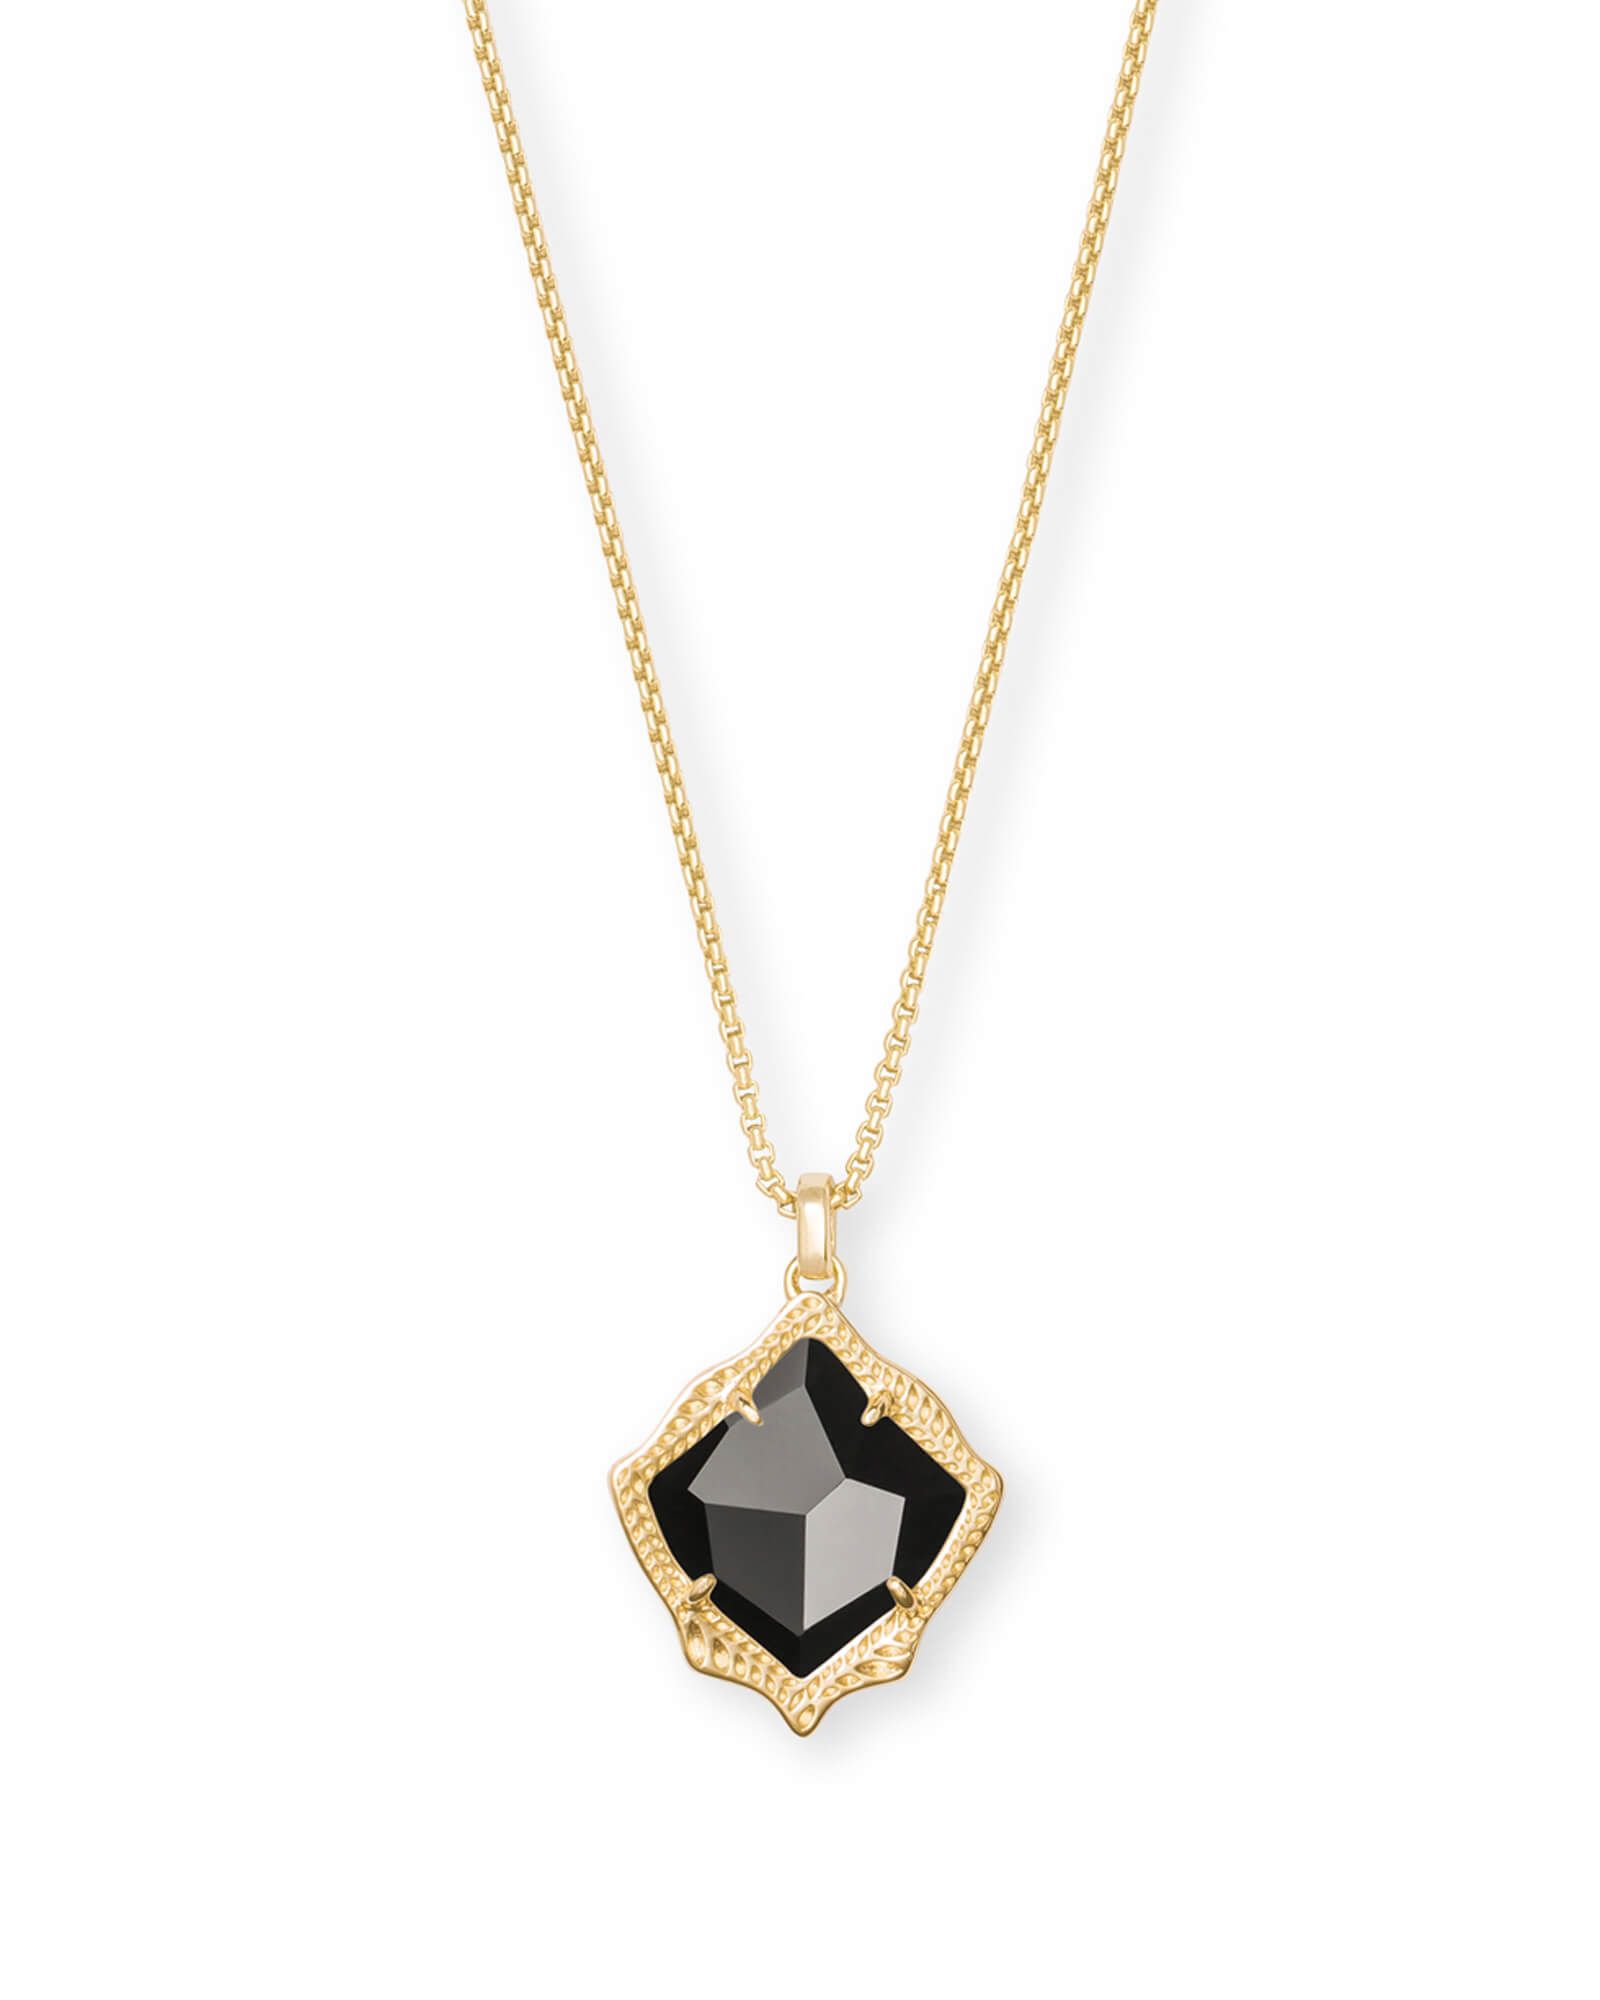 Kacey Gold Long Pendant Necklace in Black Opaque Glass | Kendra Scott